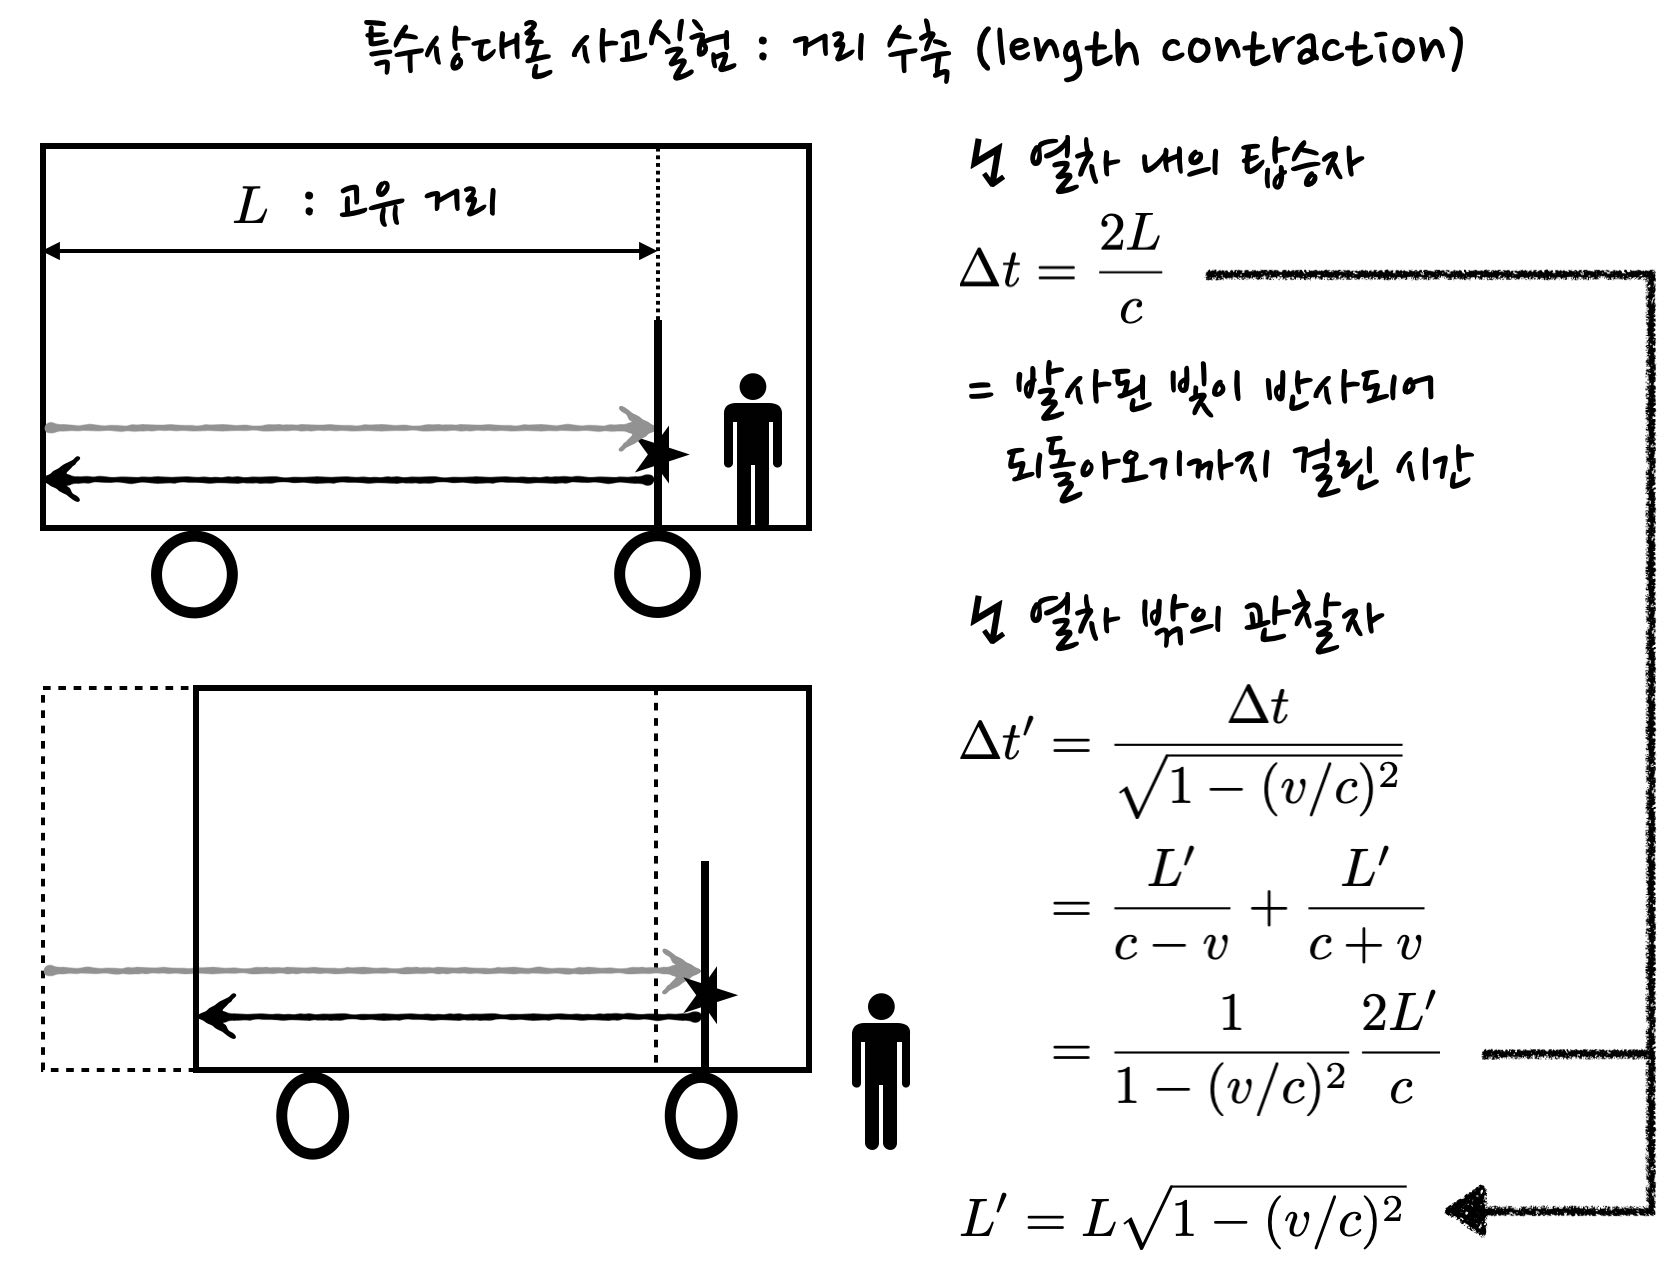 schematics of a thought experiment about length contraction, showing relation between length measured by two observers